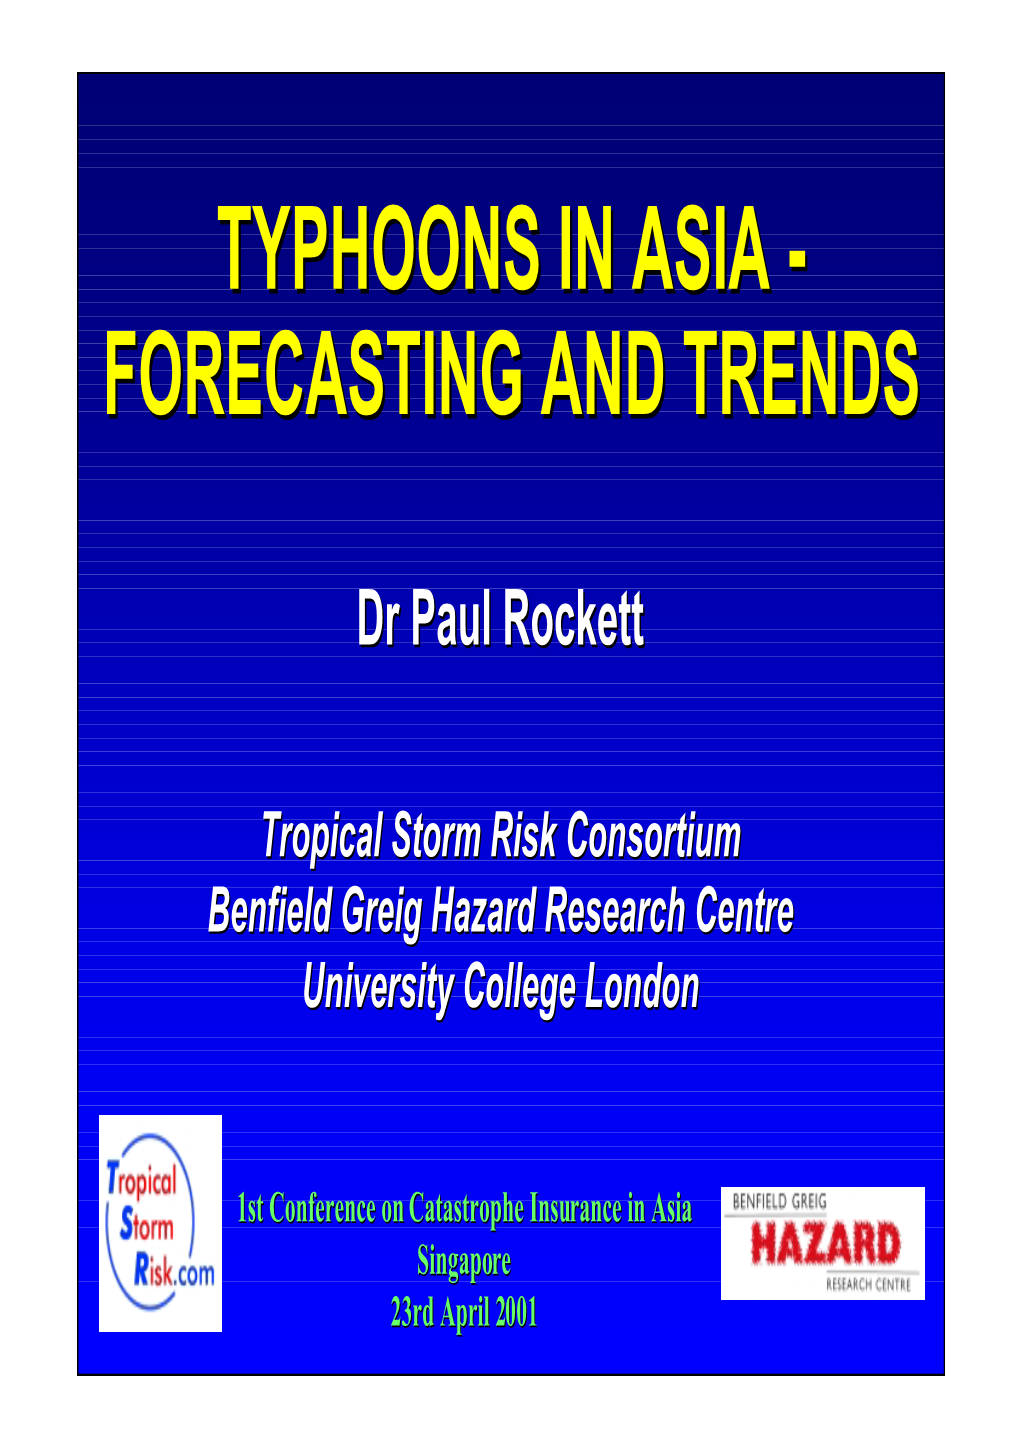 Typhoons in Asia